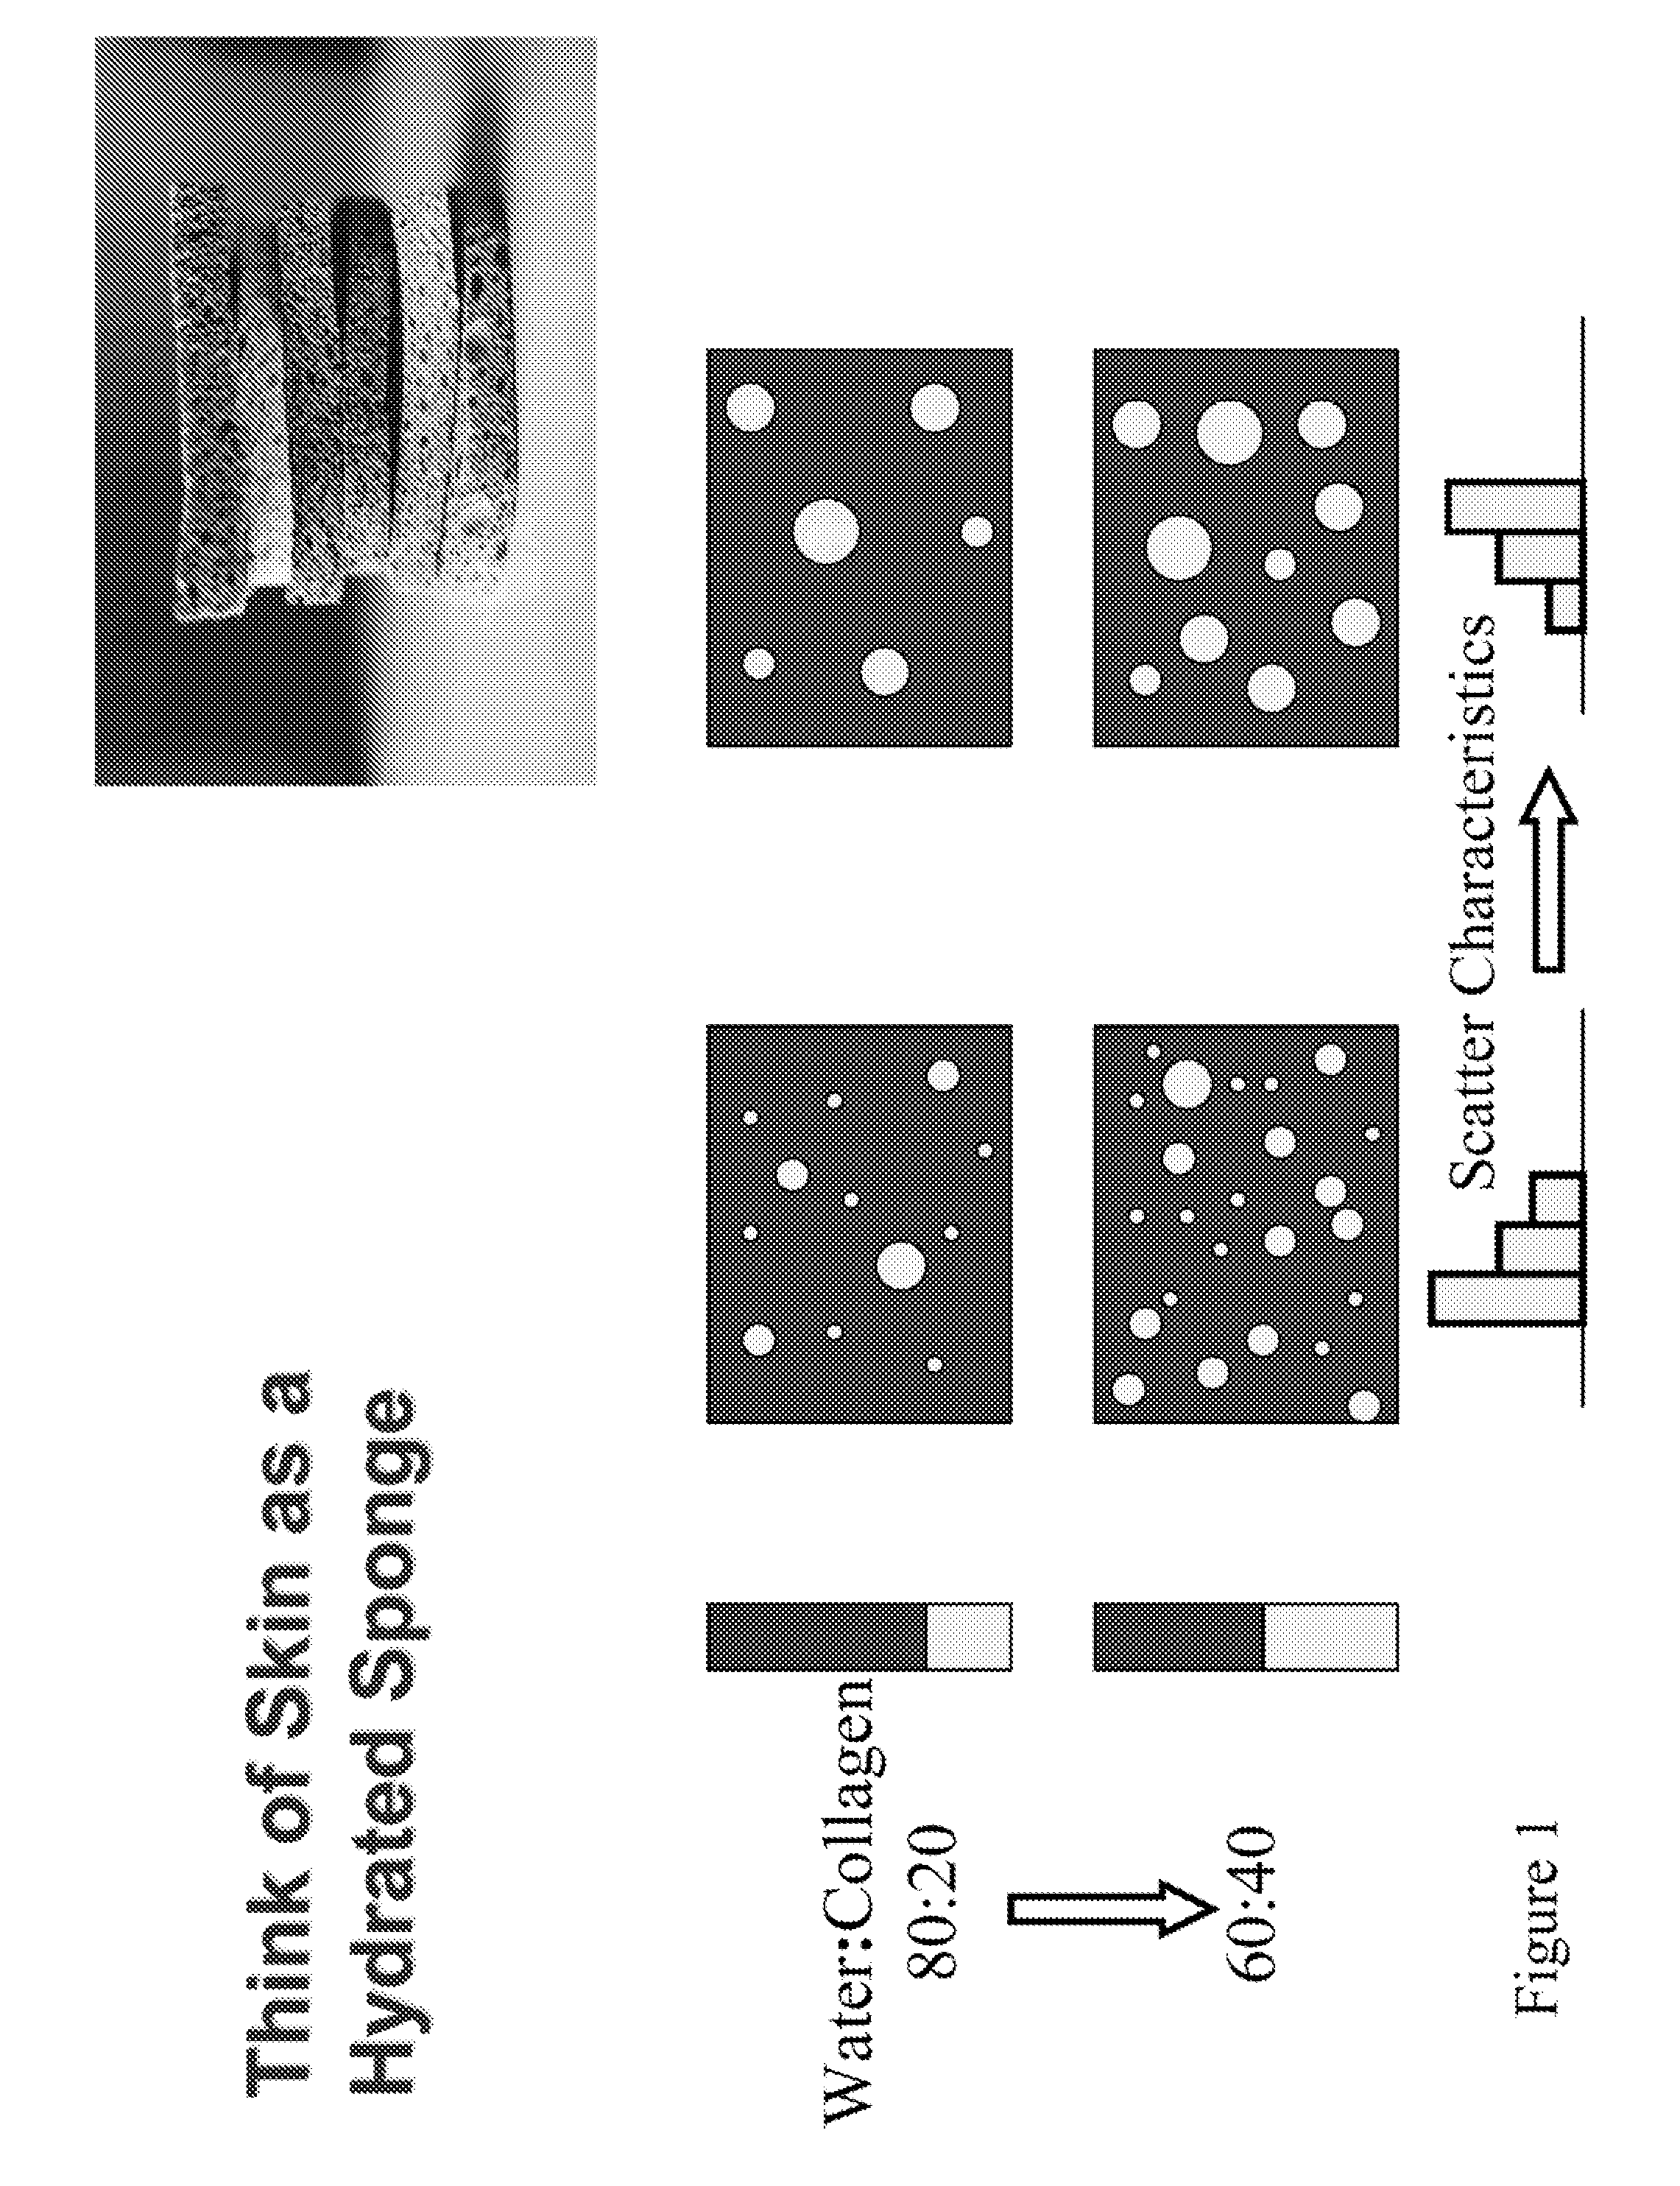 Methods and Apparatuses for Noninvasive Determinations of Analytes using Parallel Optical Paths